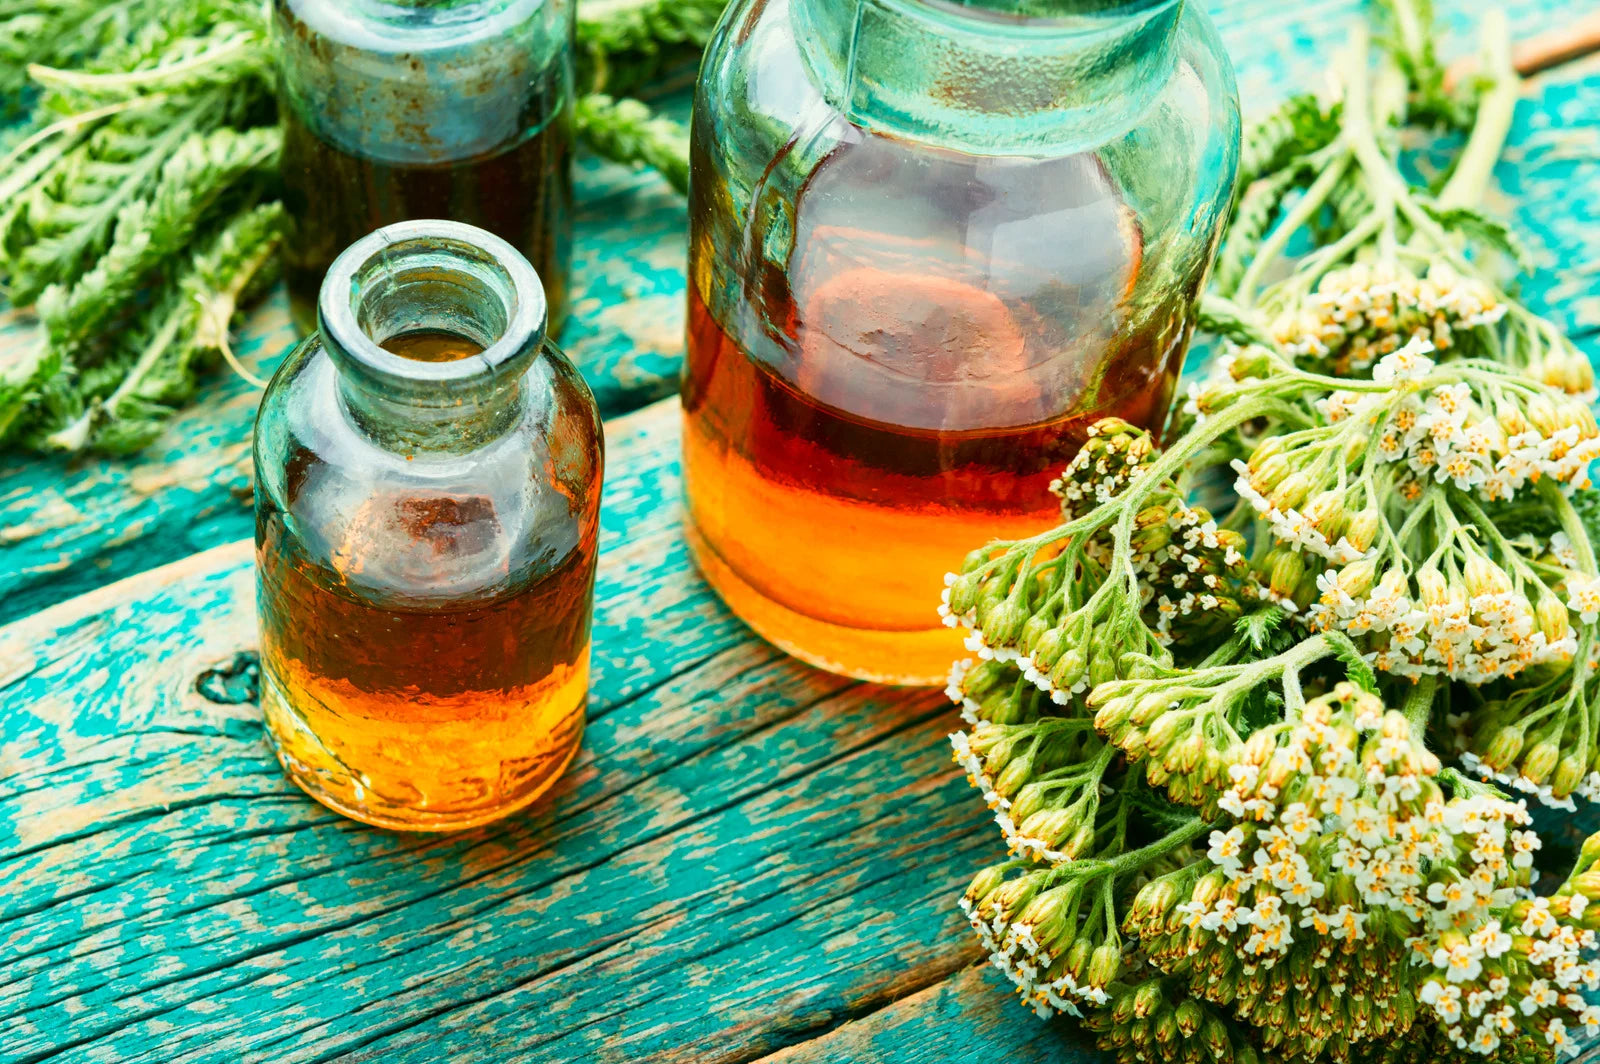 Let's Talk Yarrow: The Natural Elixir and Remarkable Health Benefits